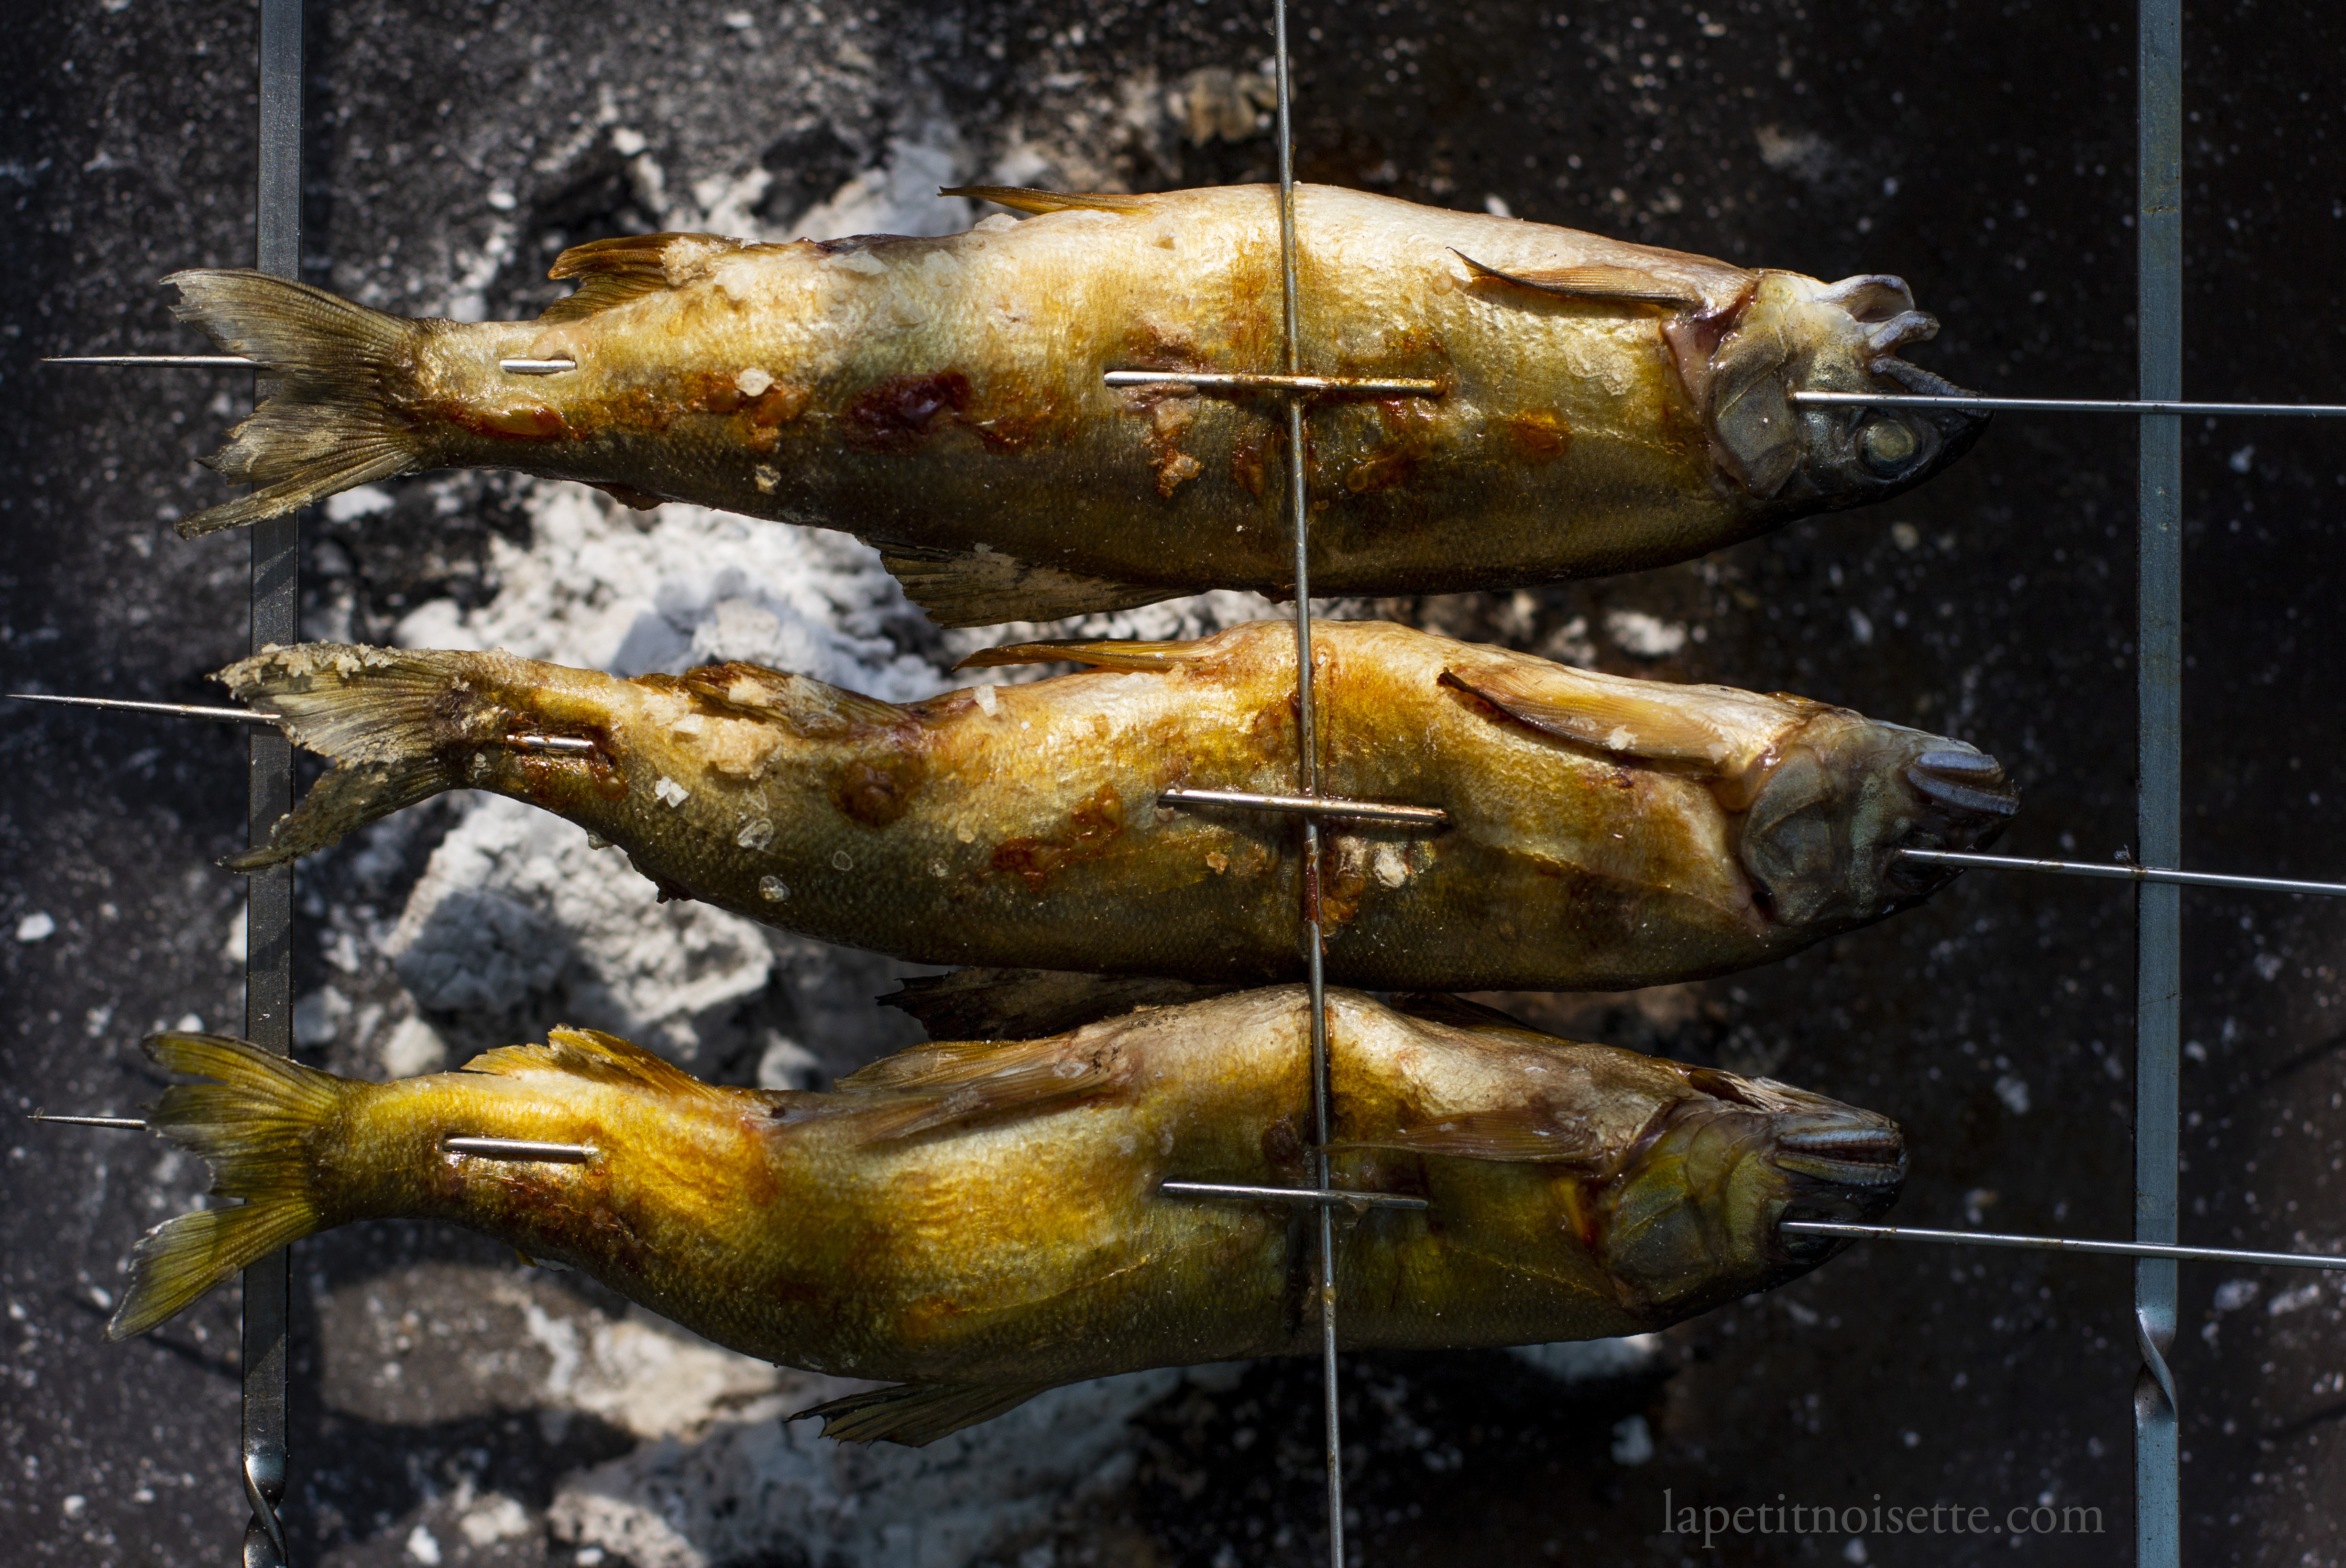 Japanese sweetfish being grilled over charcoal.